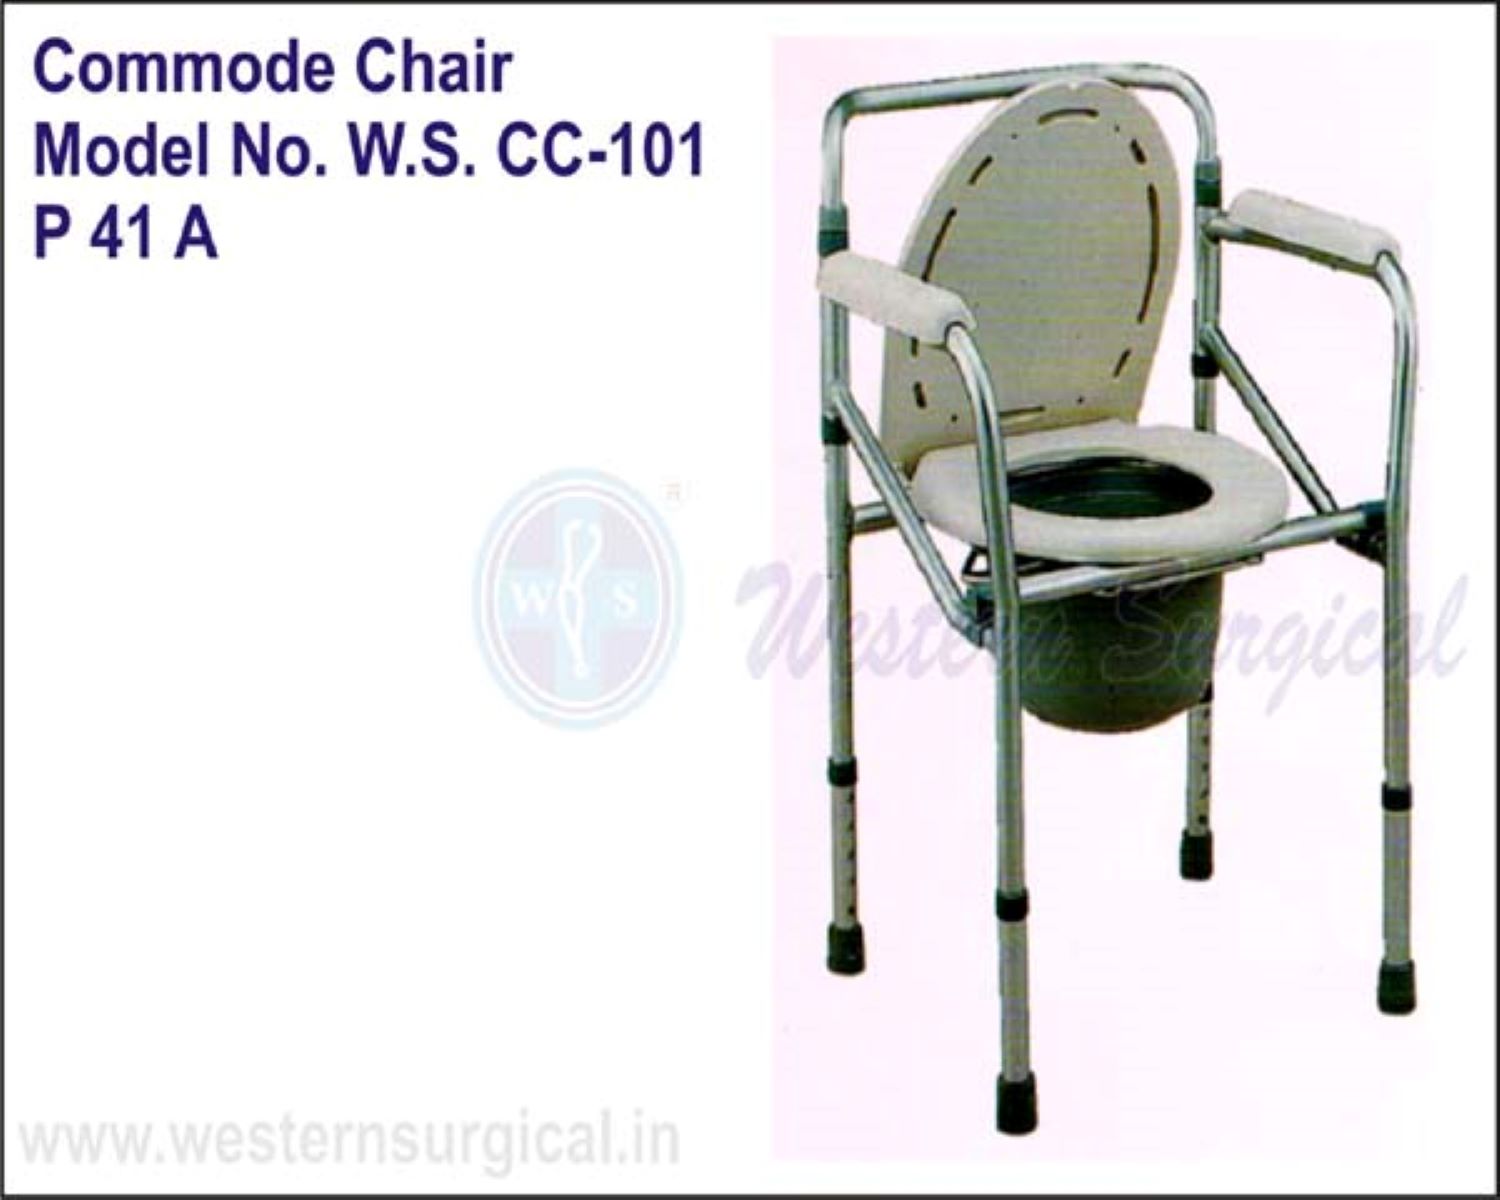 Commode Chair Model No. W.S. CC - 101